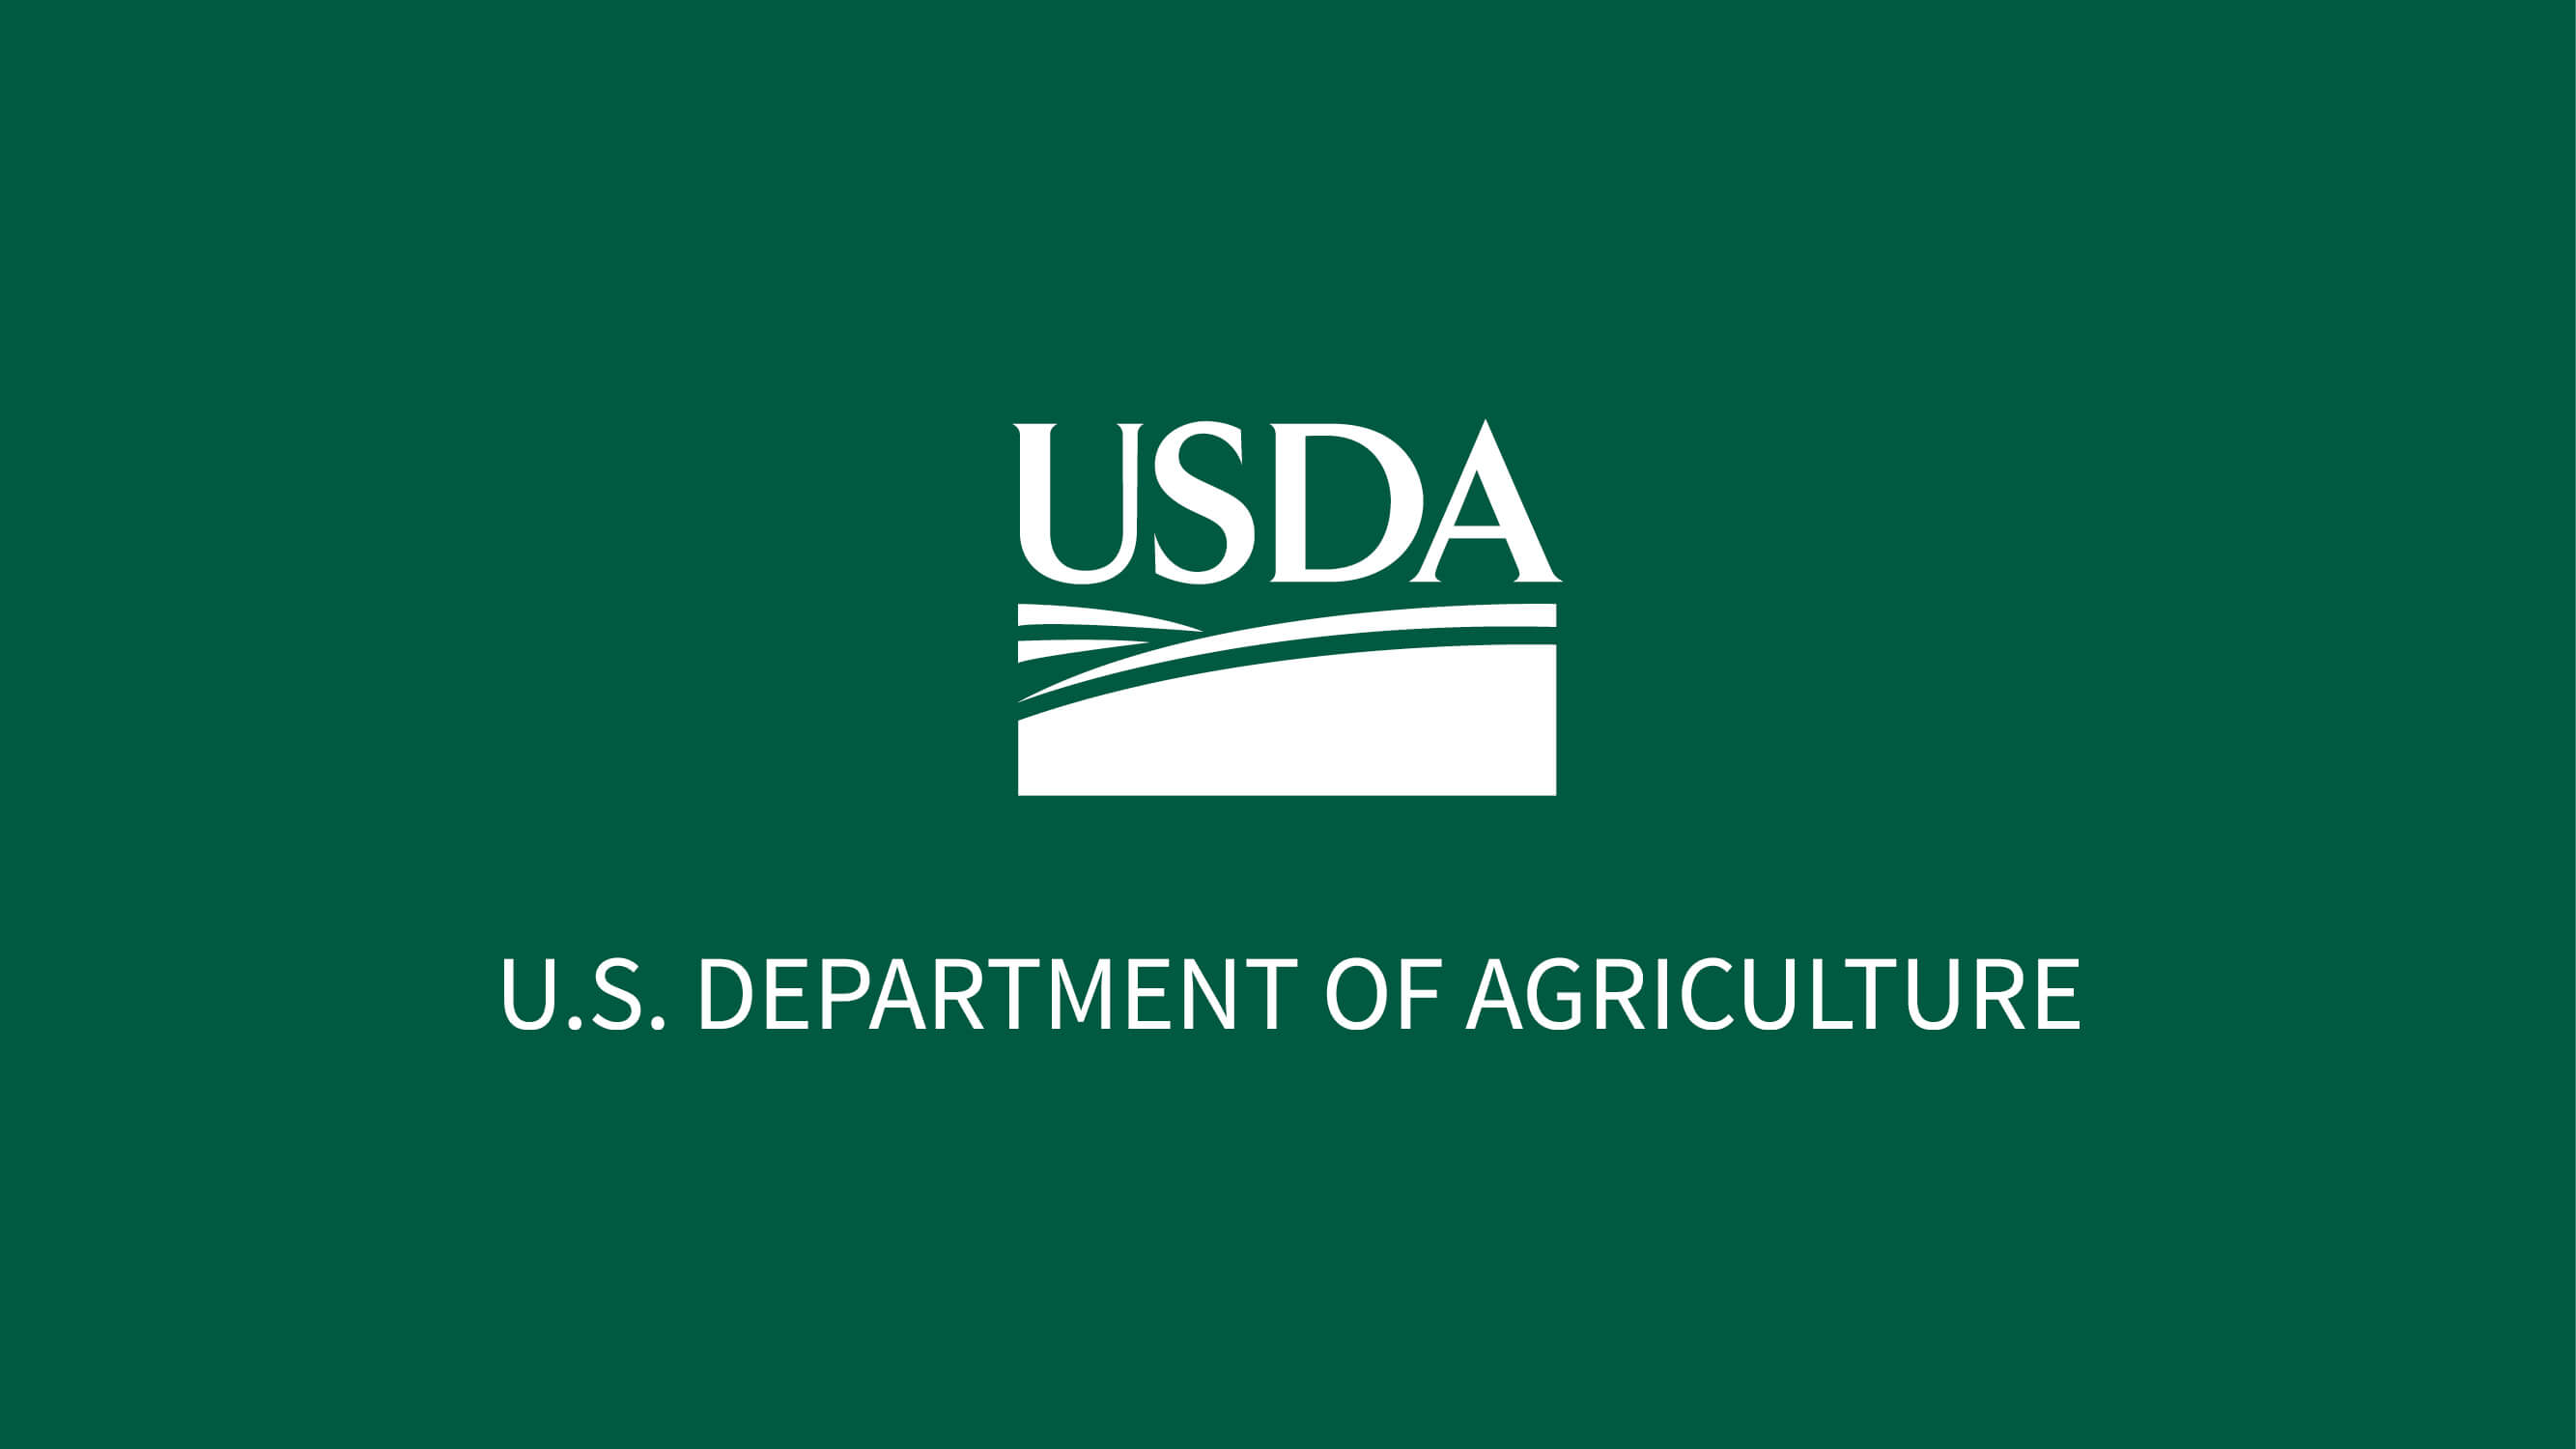 U.S. Department of Agriculture Announces New Advisor on Wildlife Conservation thumbnail